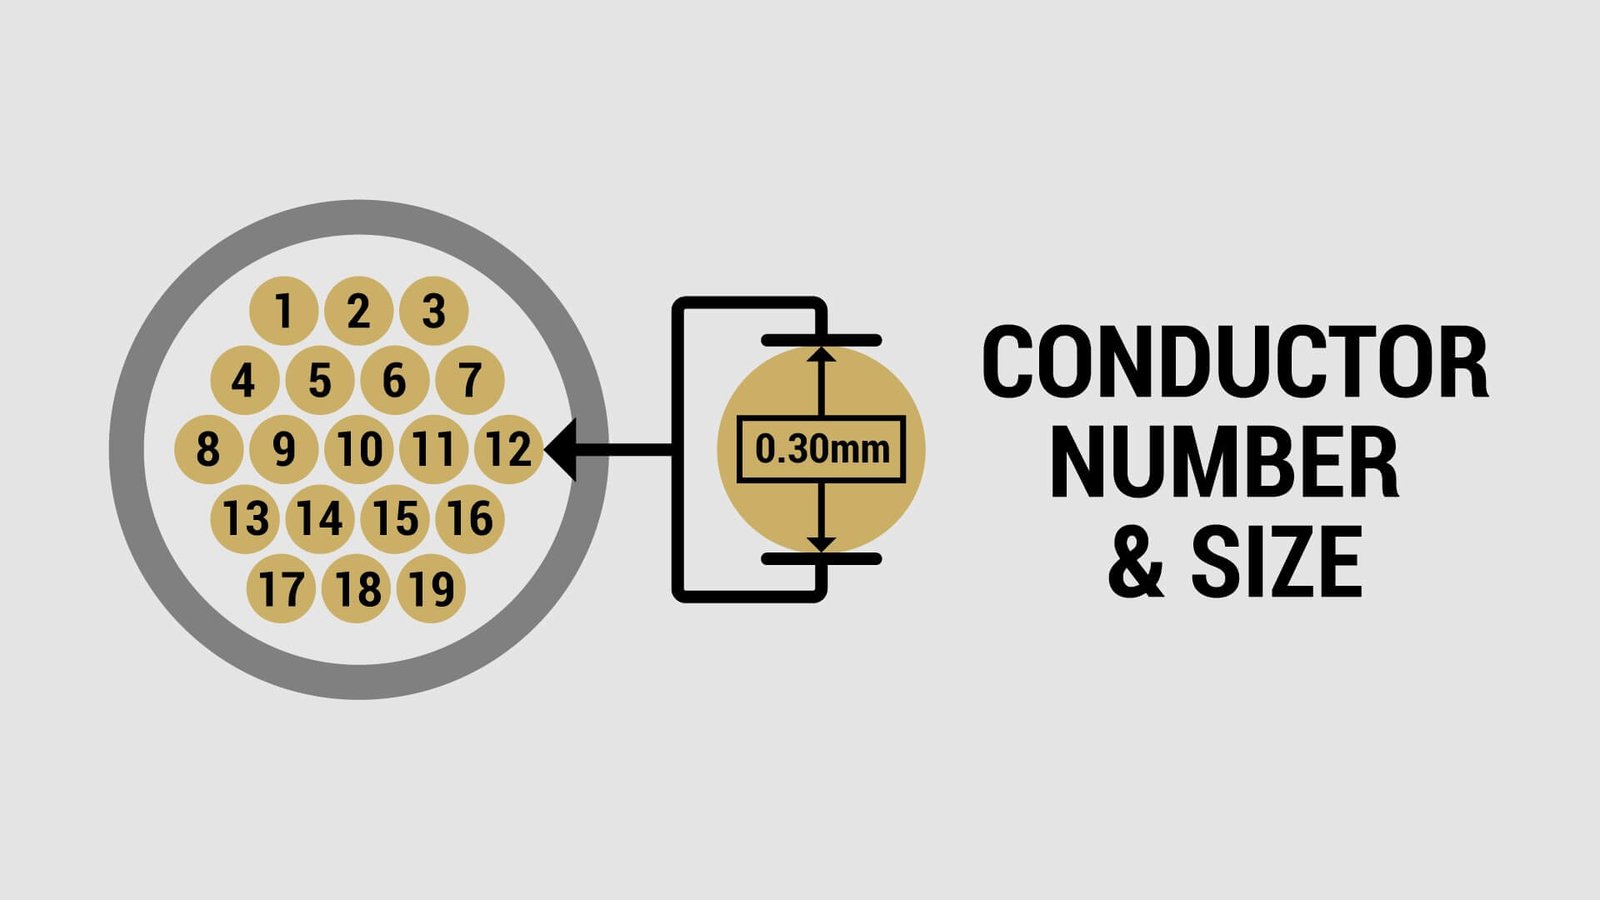 know more about conduit sizes